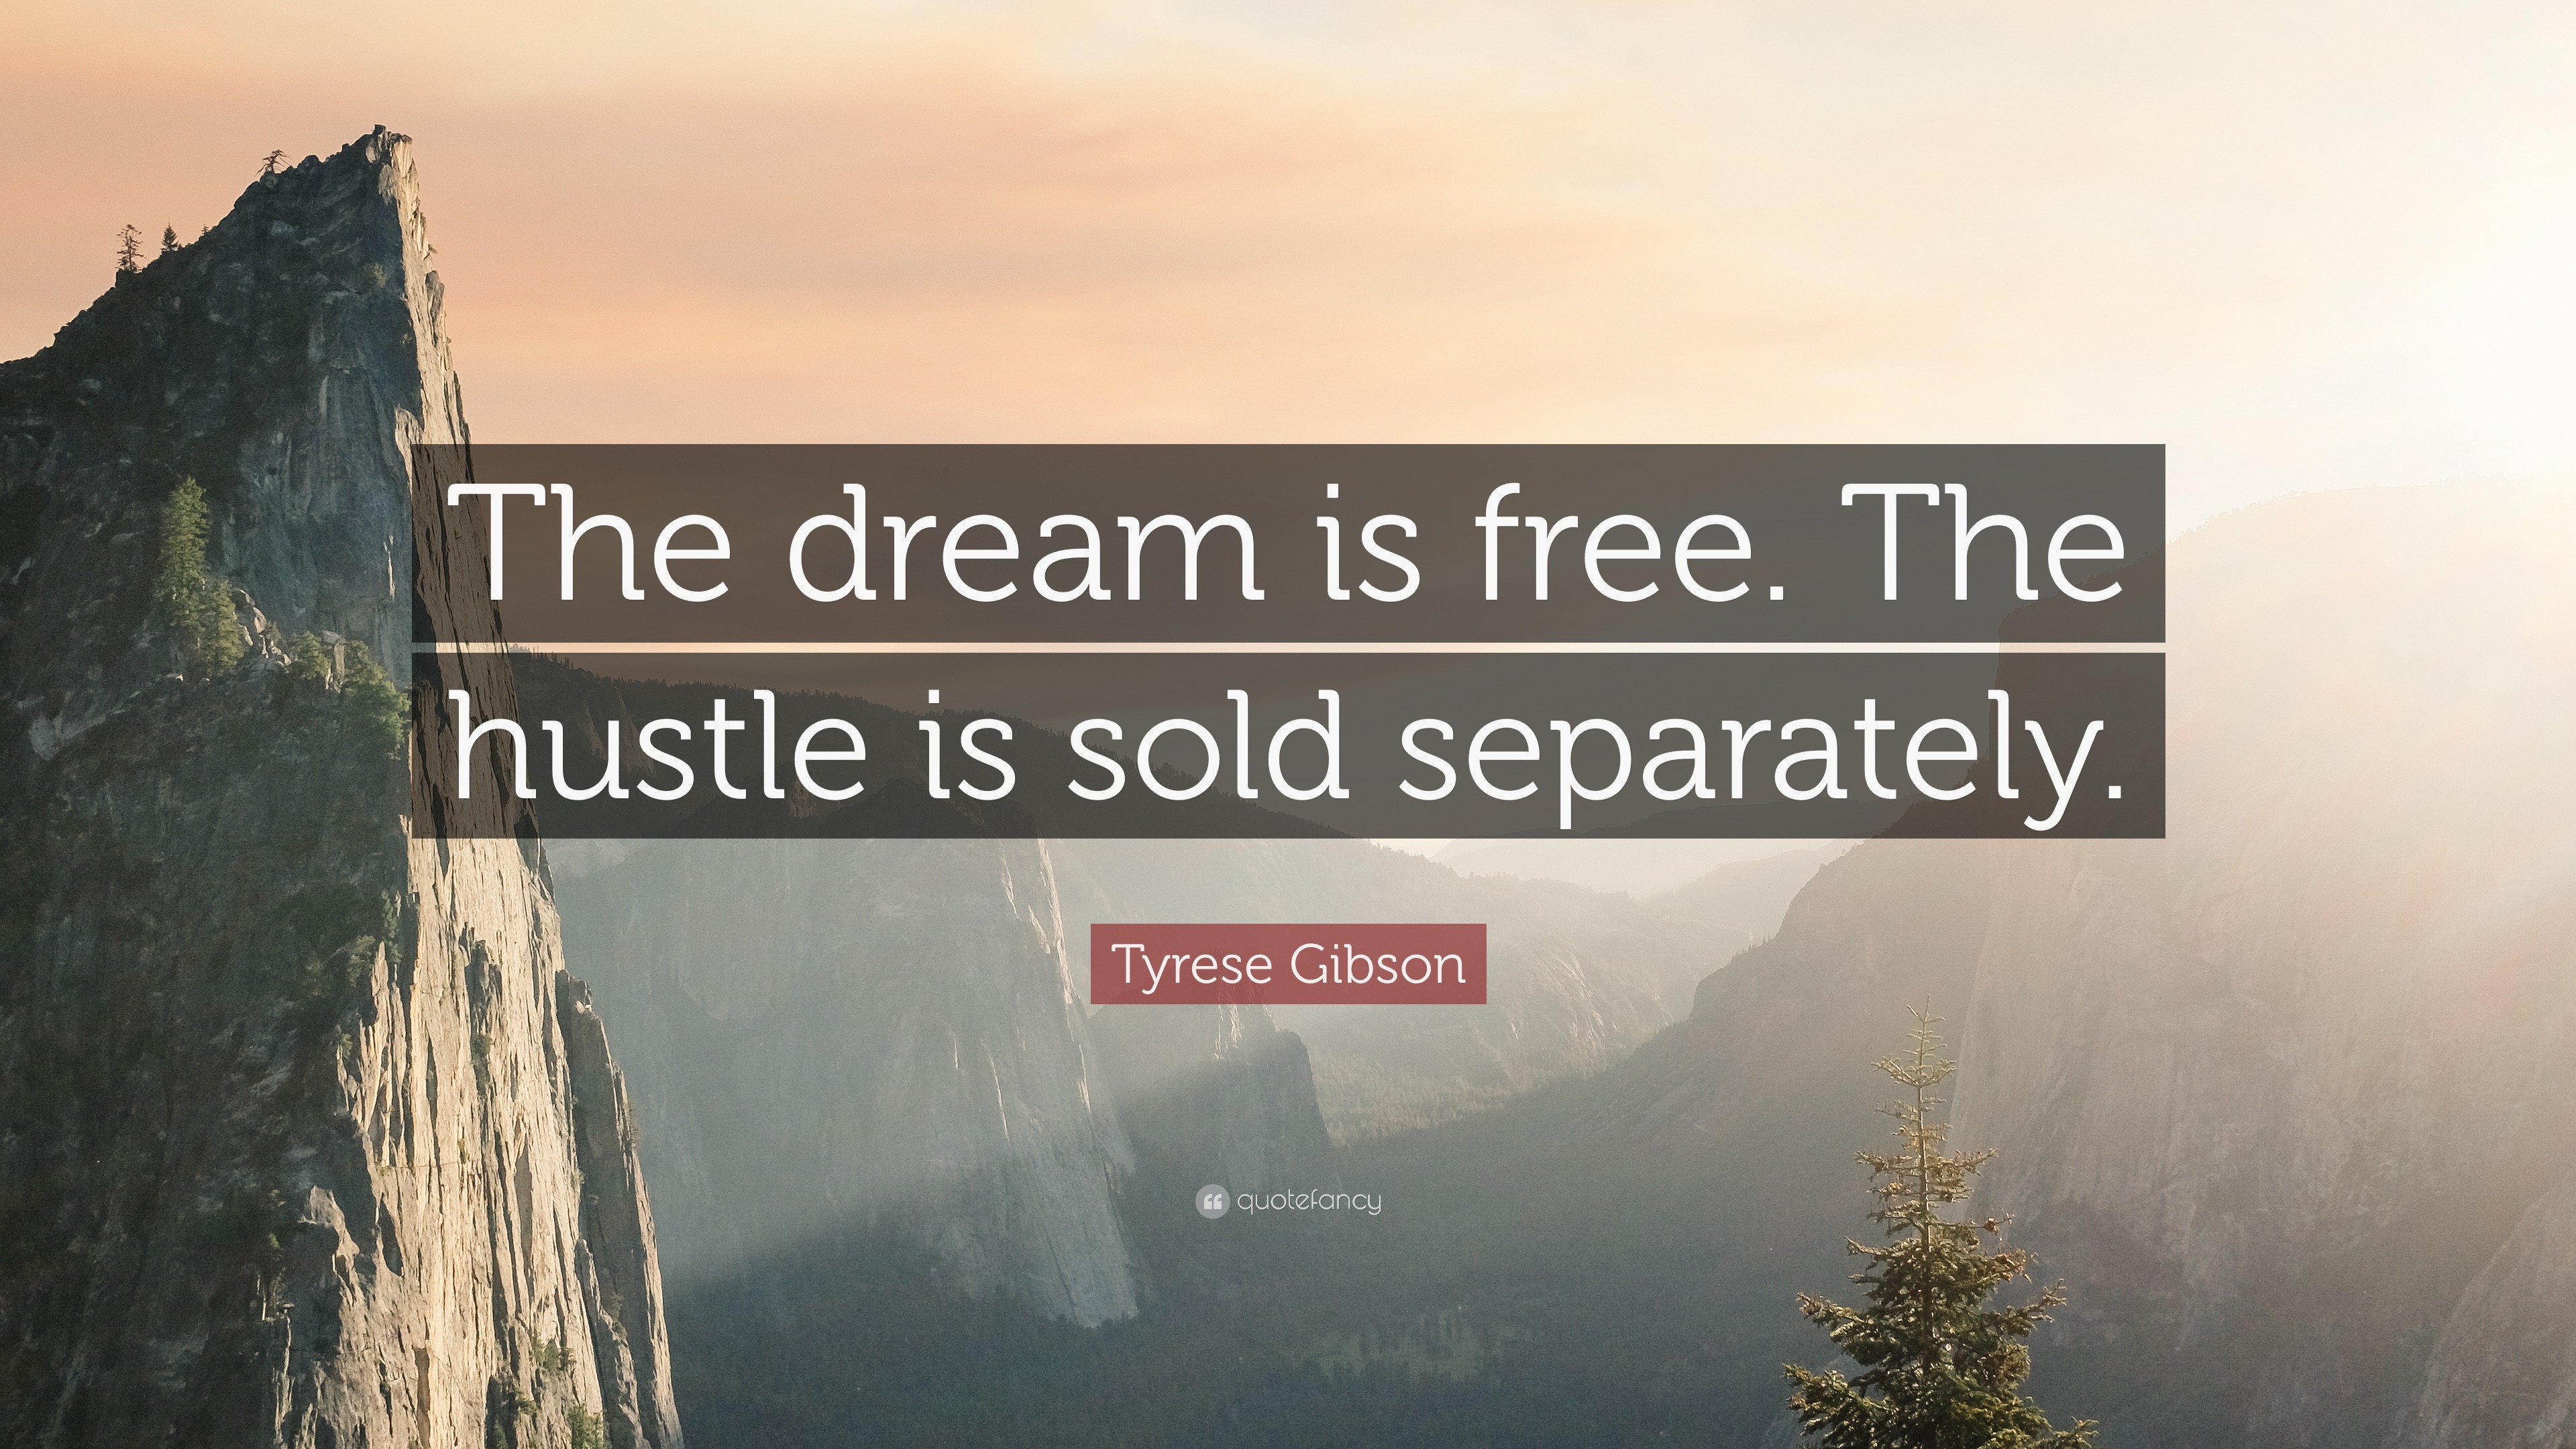 Free is is sold separately dream hustle The Dream